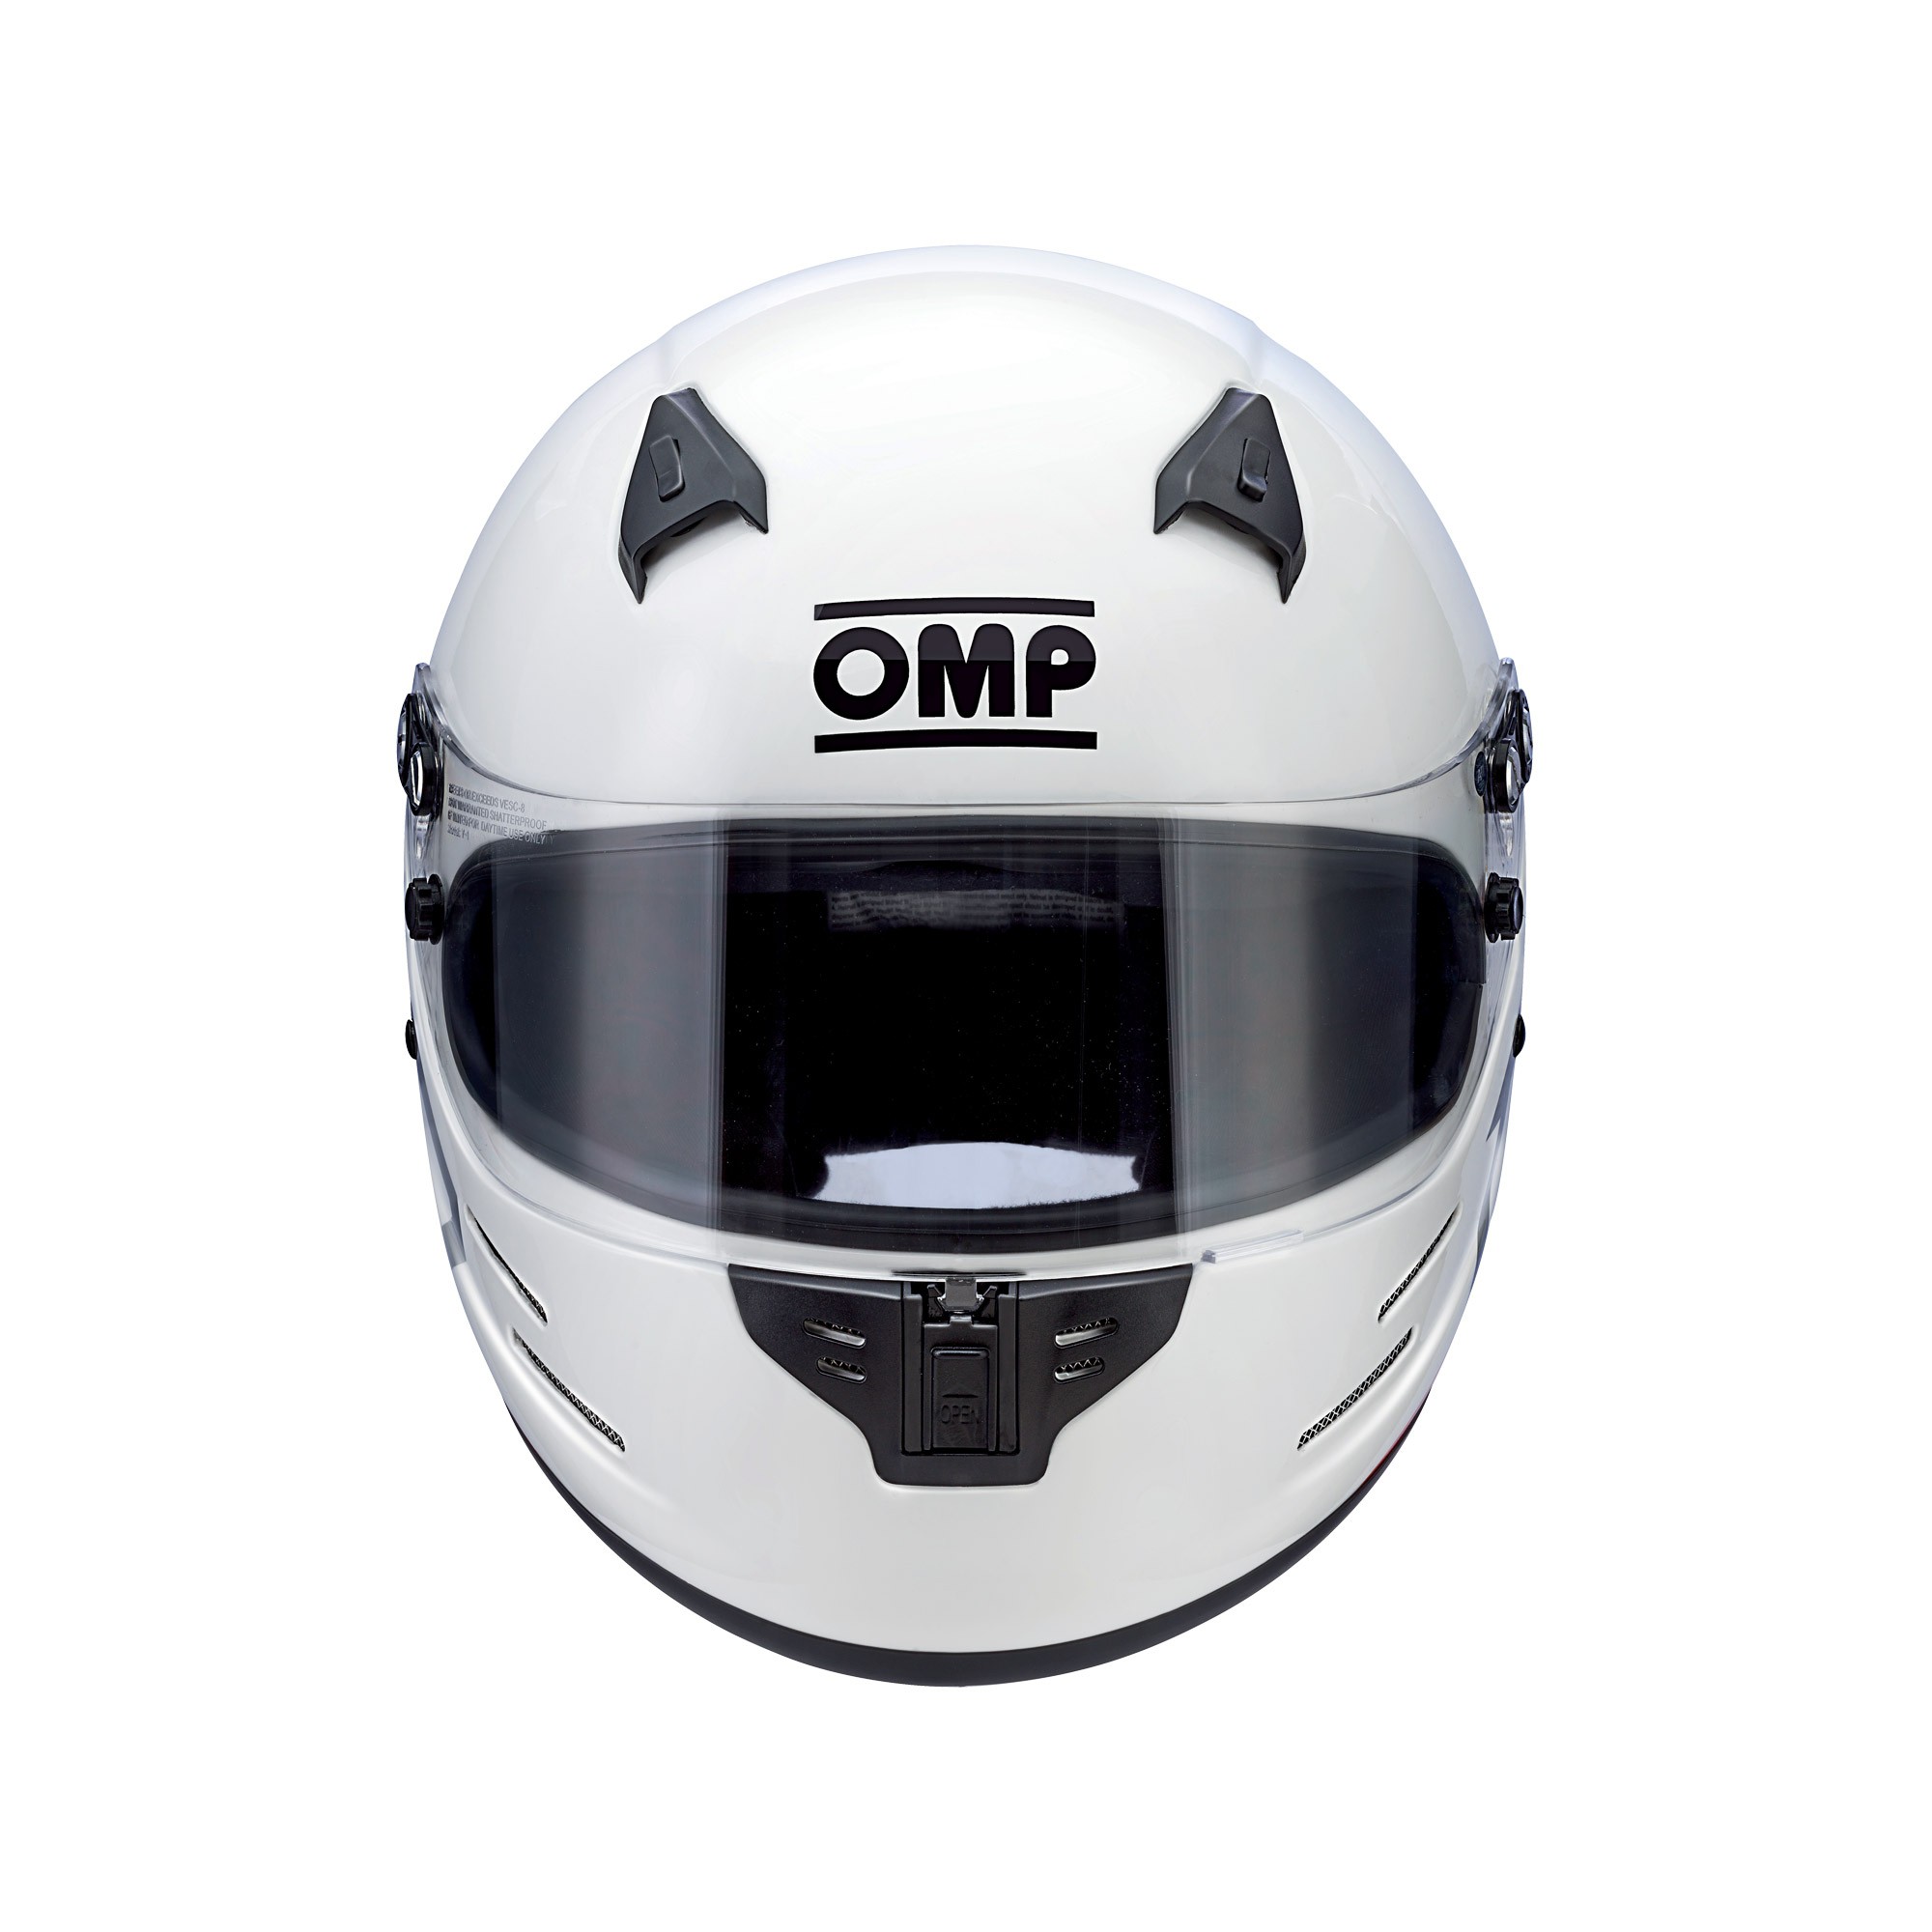 EXPRESS! Full Face Helmet 2017 OMP Racing CIRCUIT - ALL SIZES ECE Approved